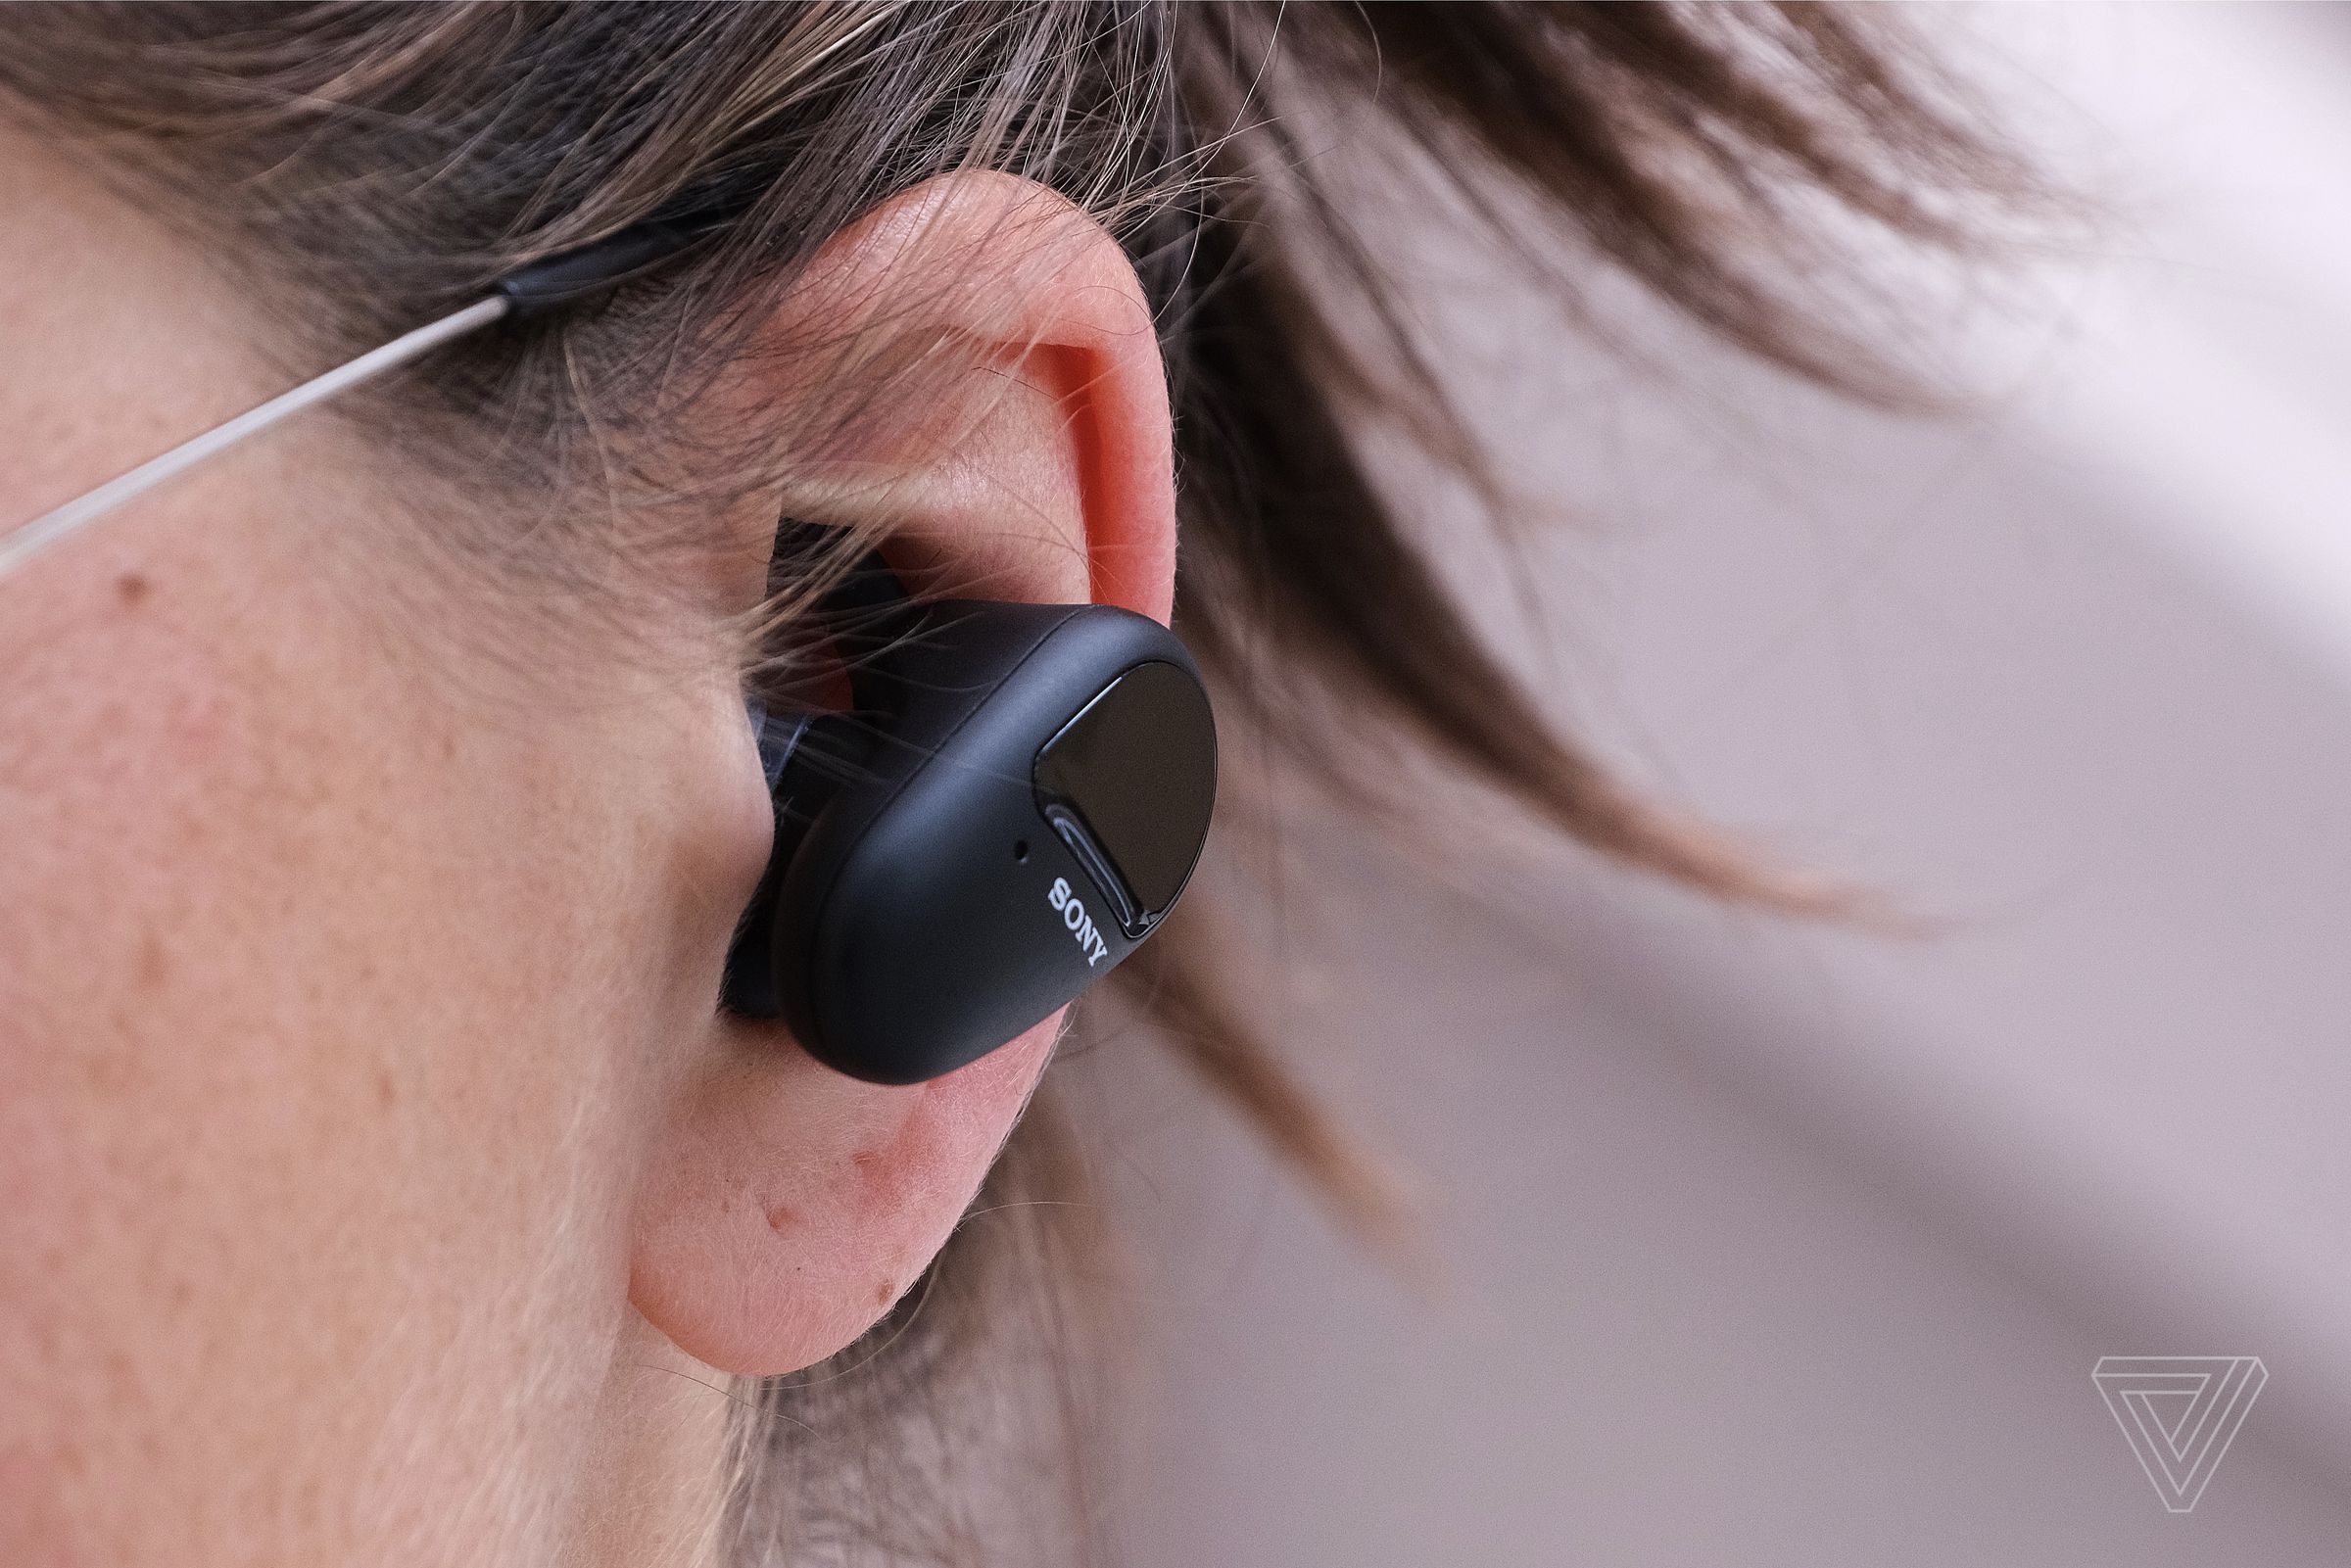 A close-up image of a Sony’s SP-800N earbuds in someone’s ear.